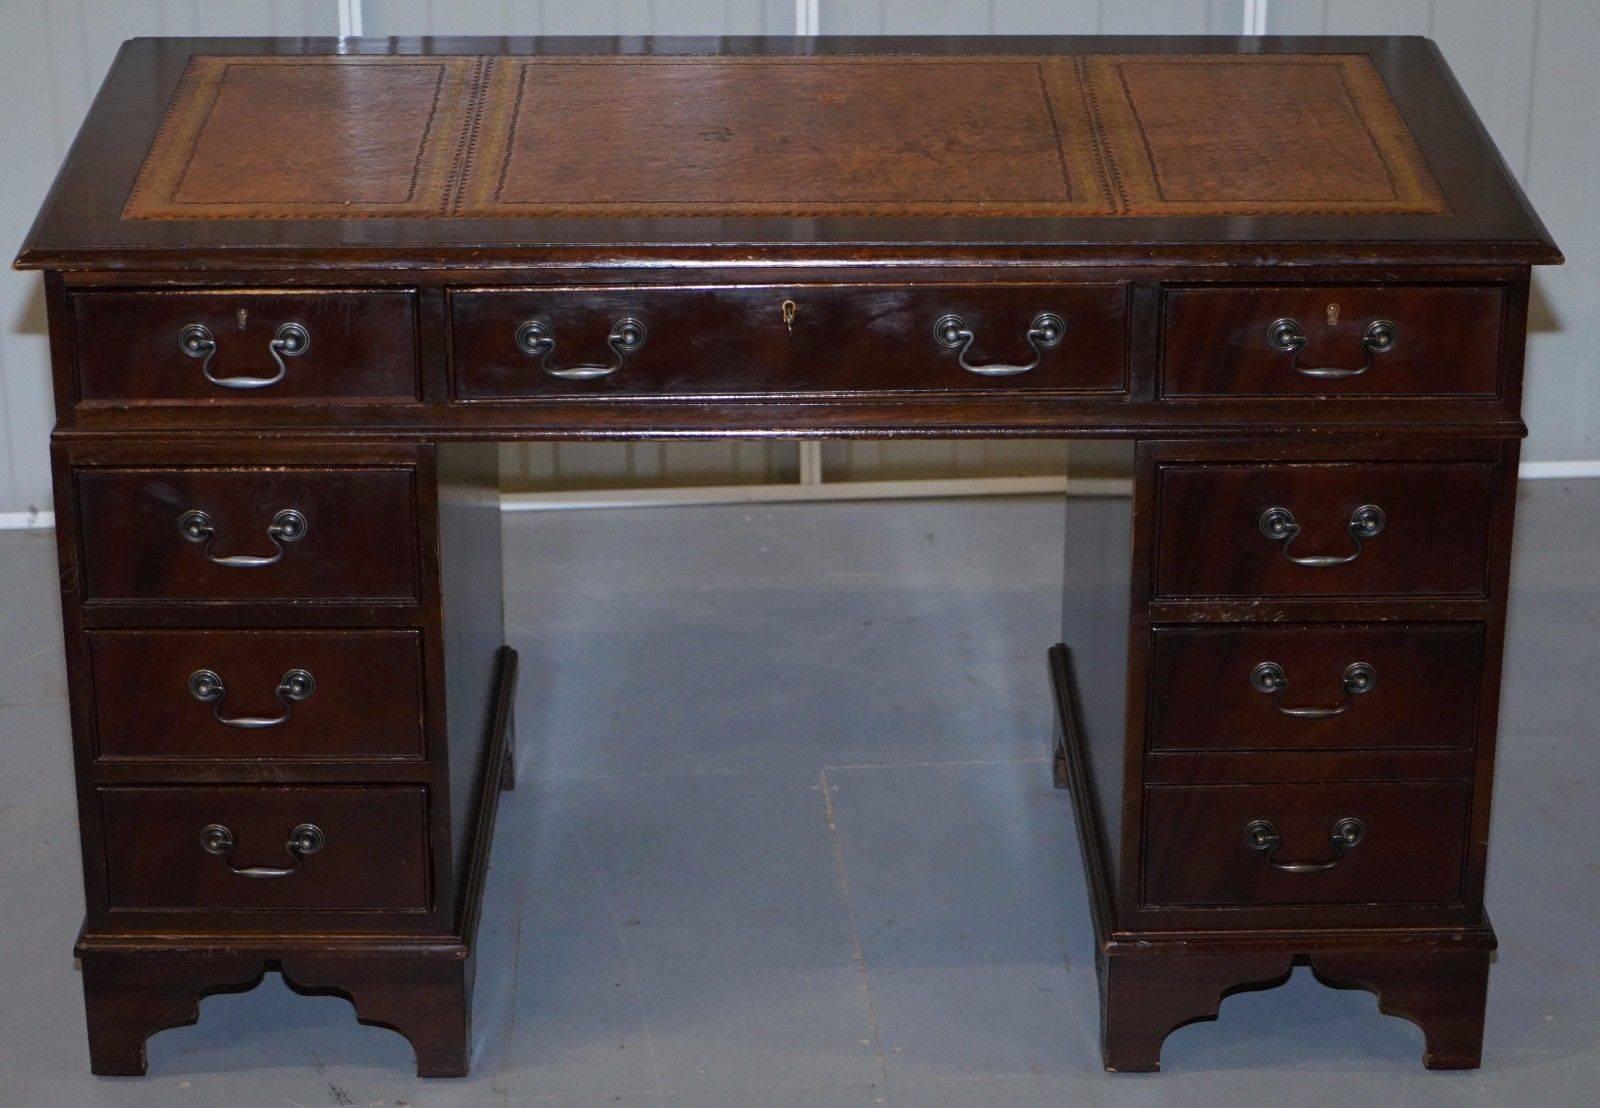 We are delighted to offer for sale this premium twin pedestal partner desk with luxury medium brown gold inlaid leather writing surface

There are many variations of these desks starting with basic soft wood, there are around six levels from the